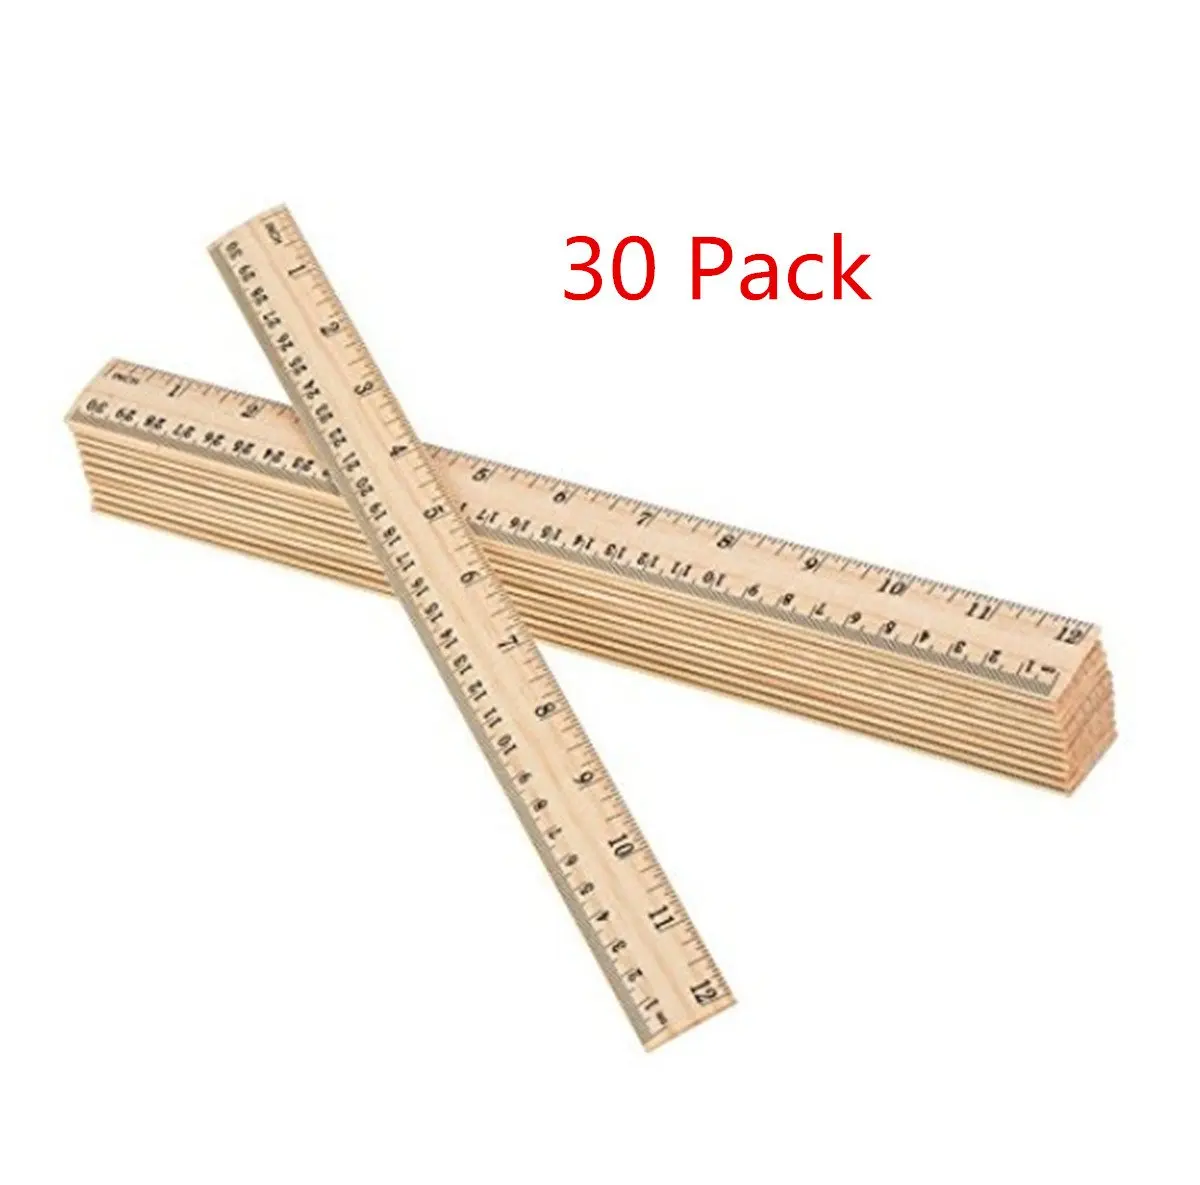 12 Inch and 30 CM SODIAL 20 PCS Pack Wood Ruler for School //Office //Student Wooden Measuring Ruler With 2 scale